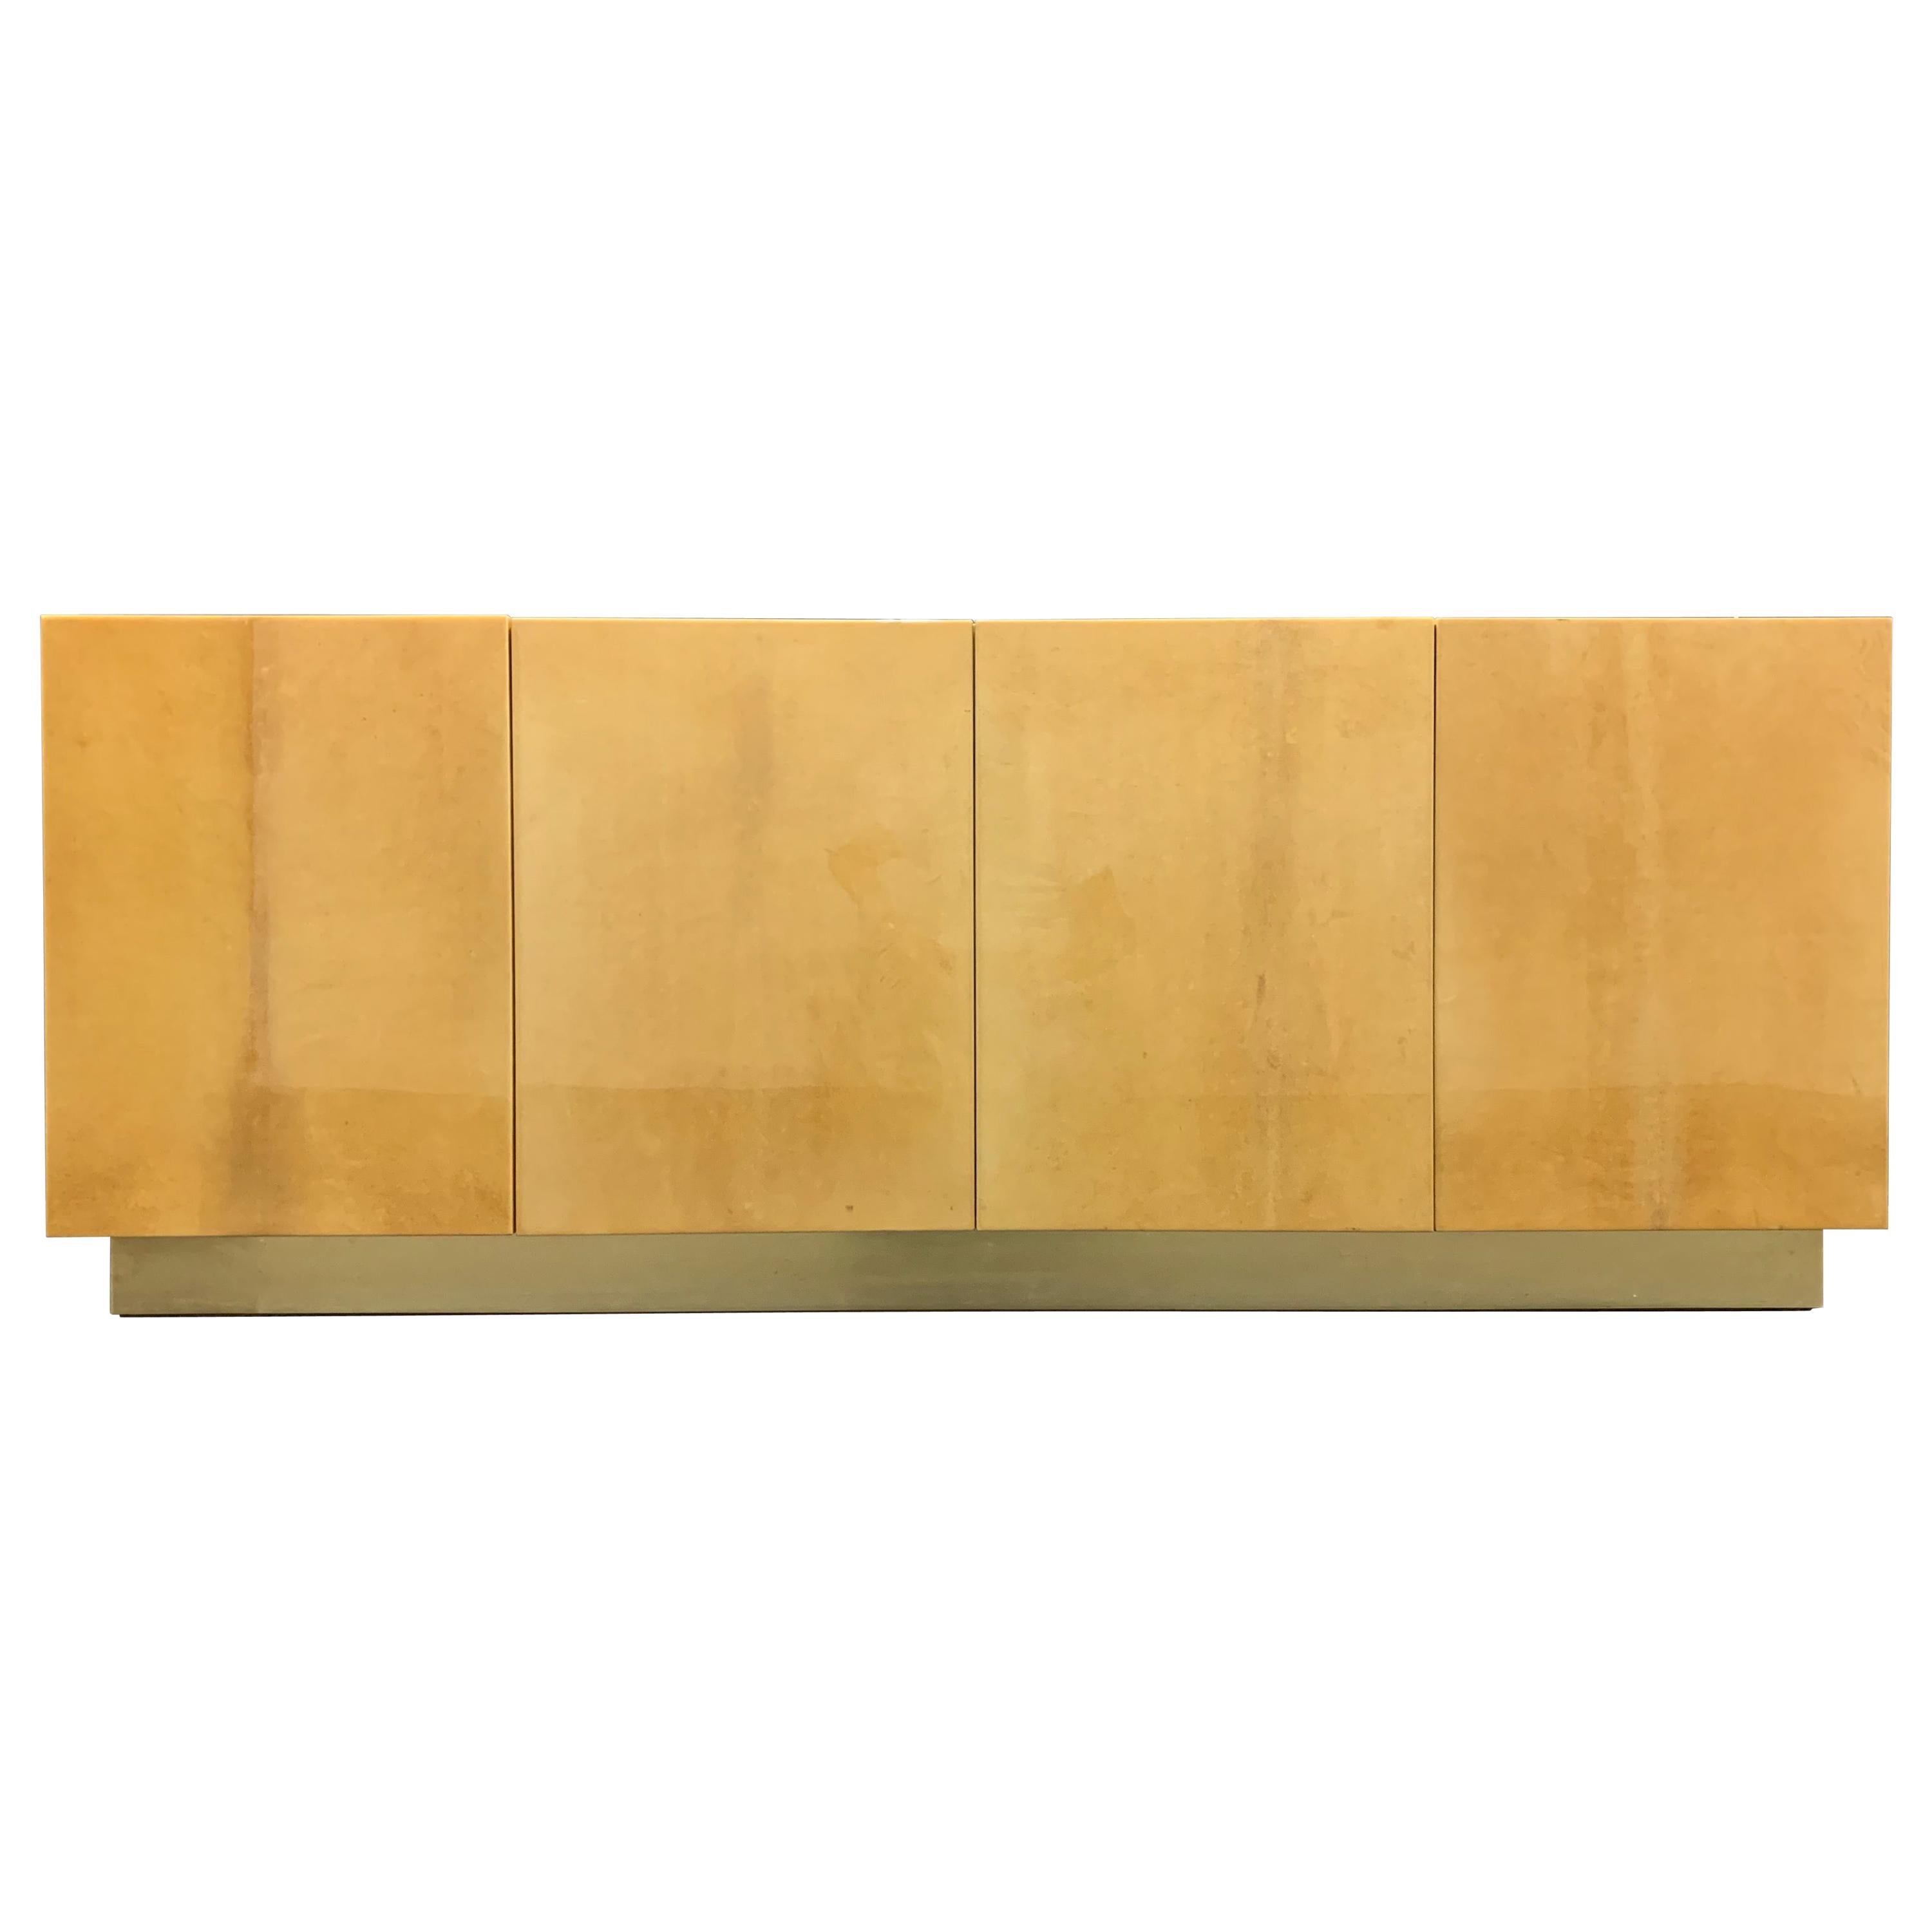 Breathtaking Aldo Tura Sideboard or Room Divider with Real Back